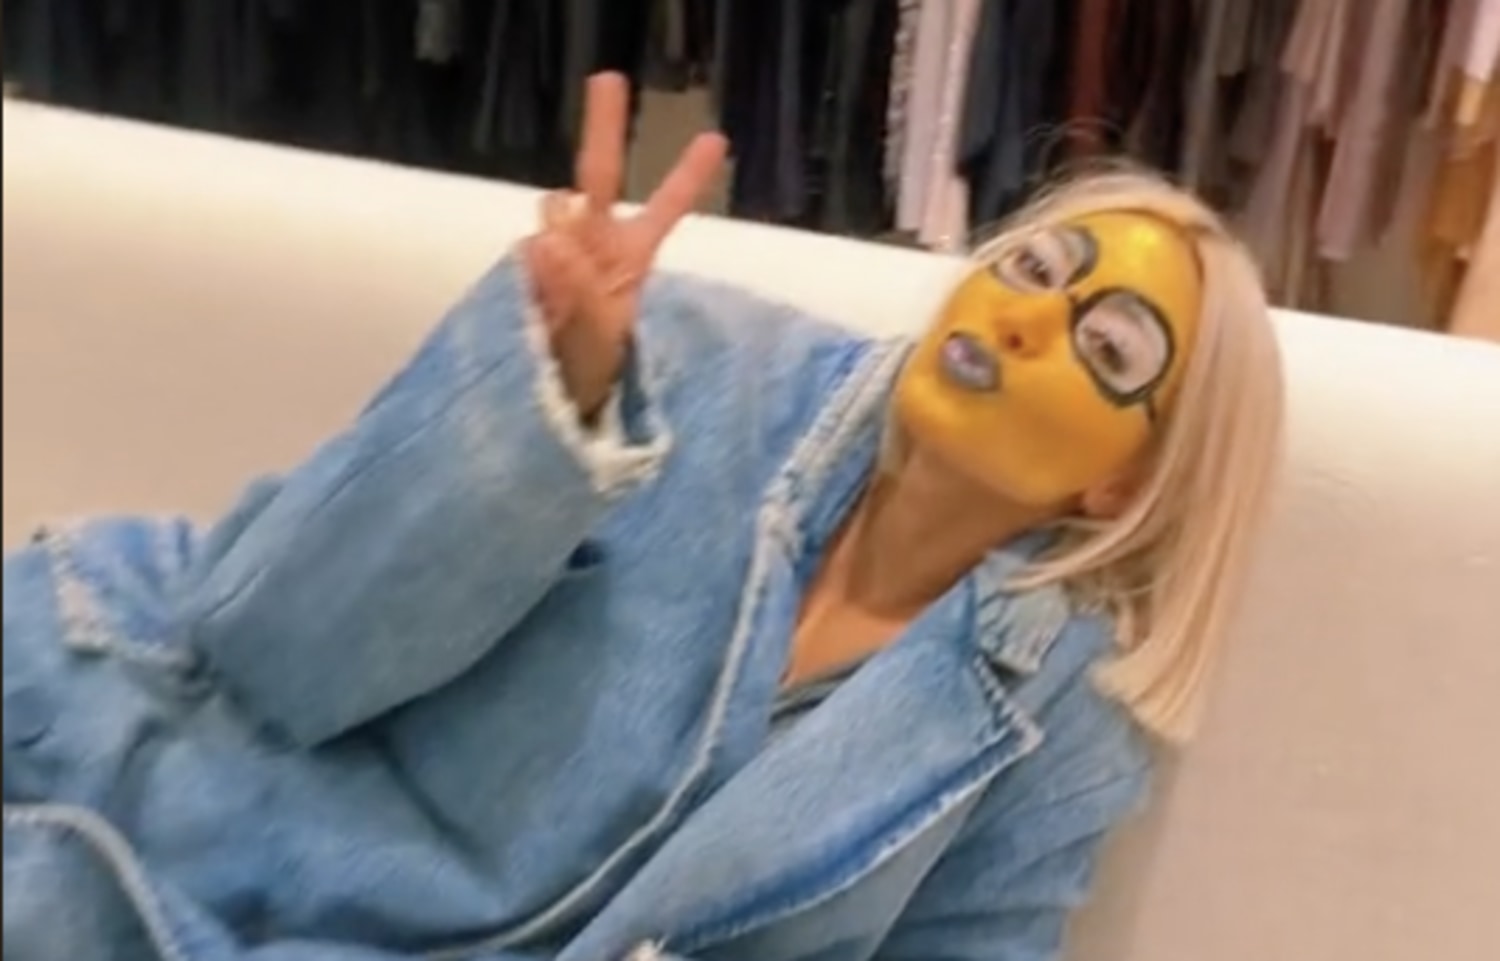 Girl transforms herself into a Minion with makeup, joins them for